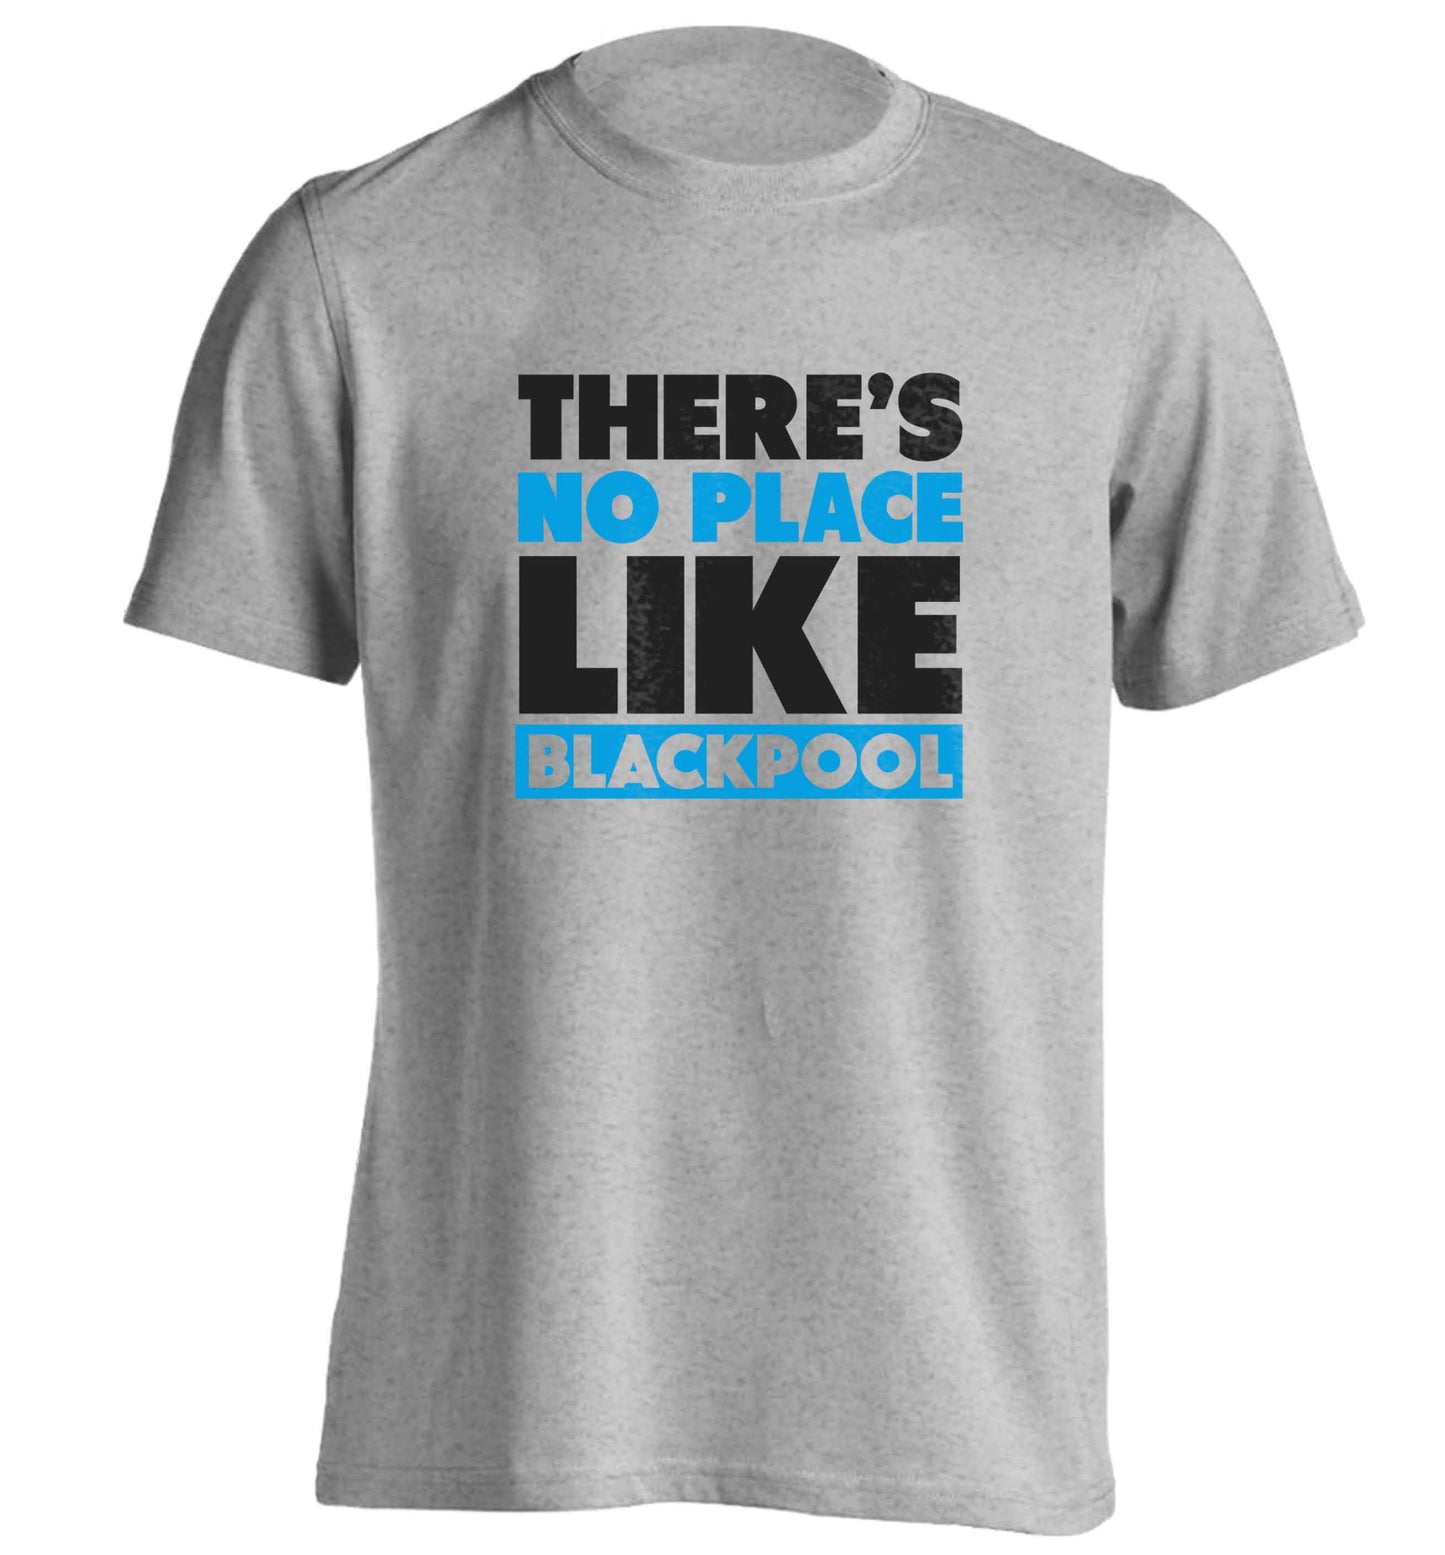 There's no place like Blackpool adults unisex grey Tshirt 2XL